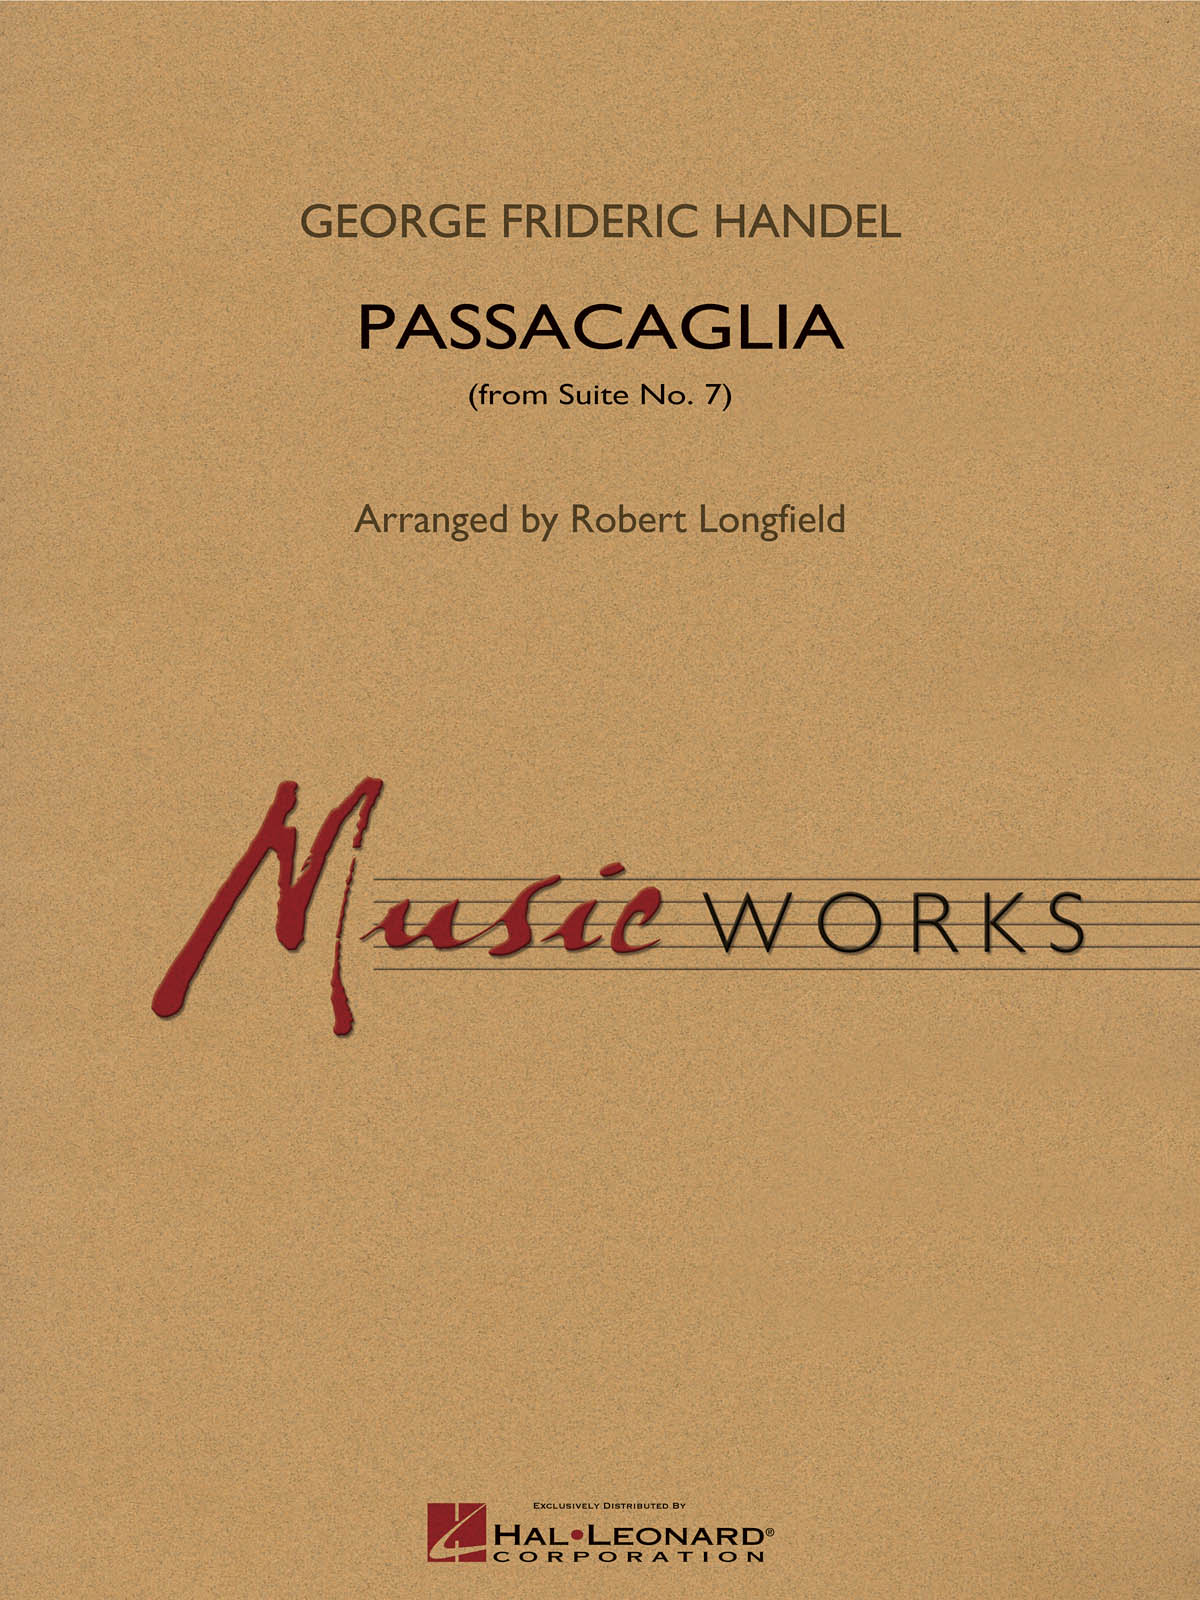 Georg Friedrich Hndel: Passacaglia (from Suite No. 7): Concert Band: Score